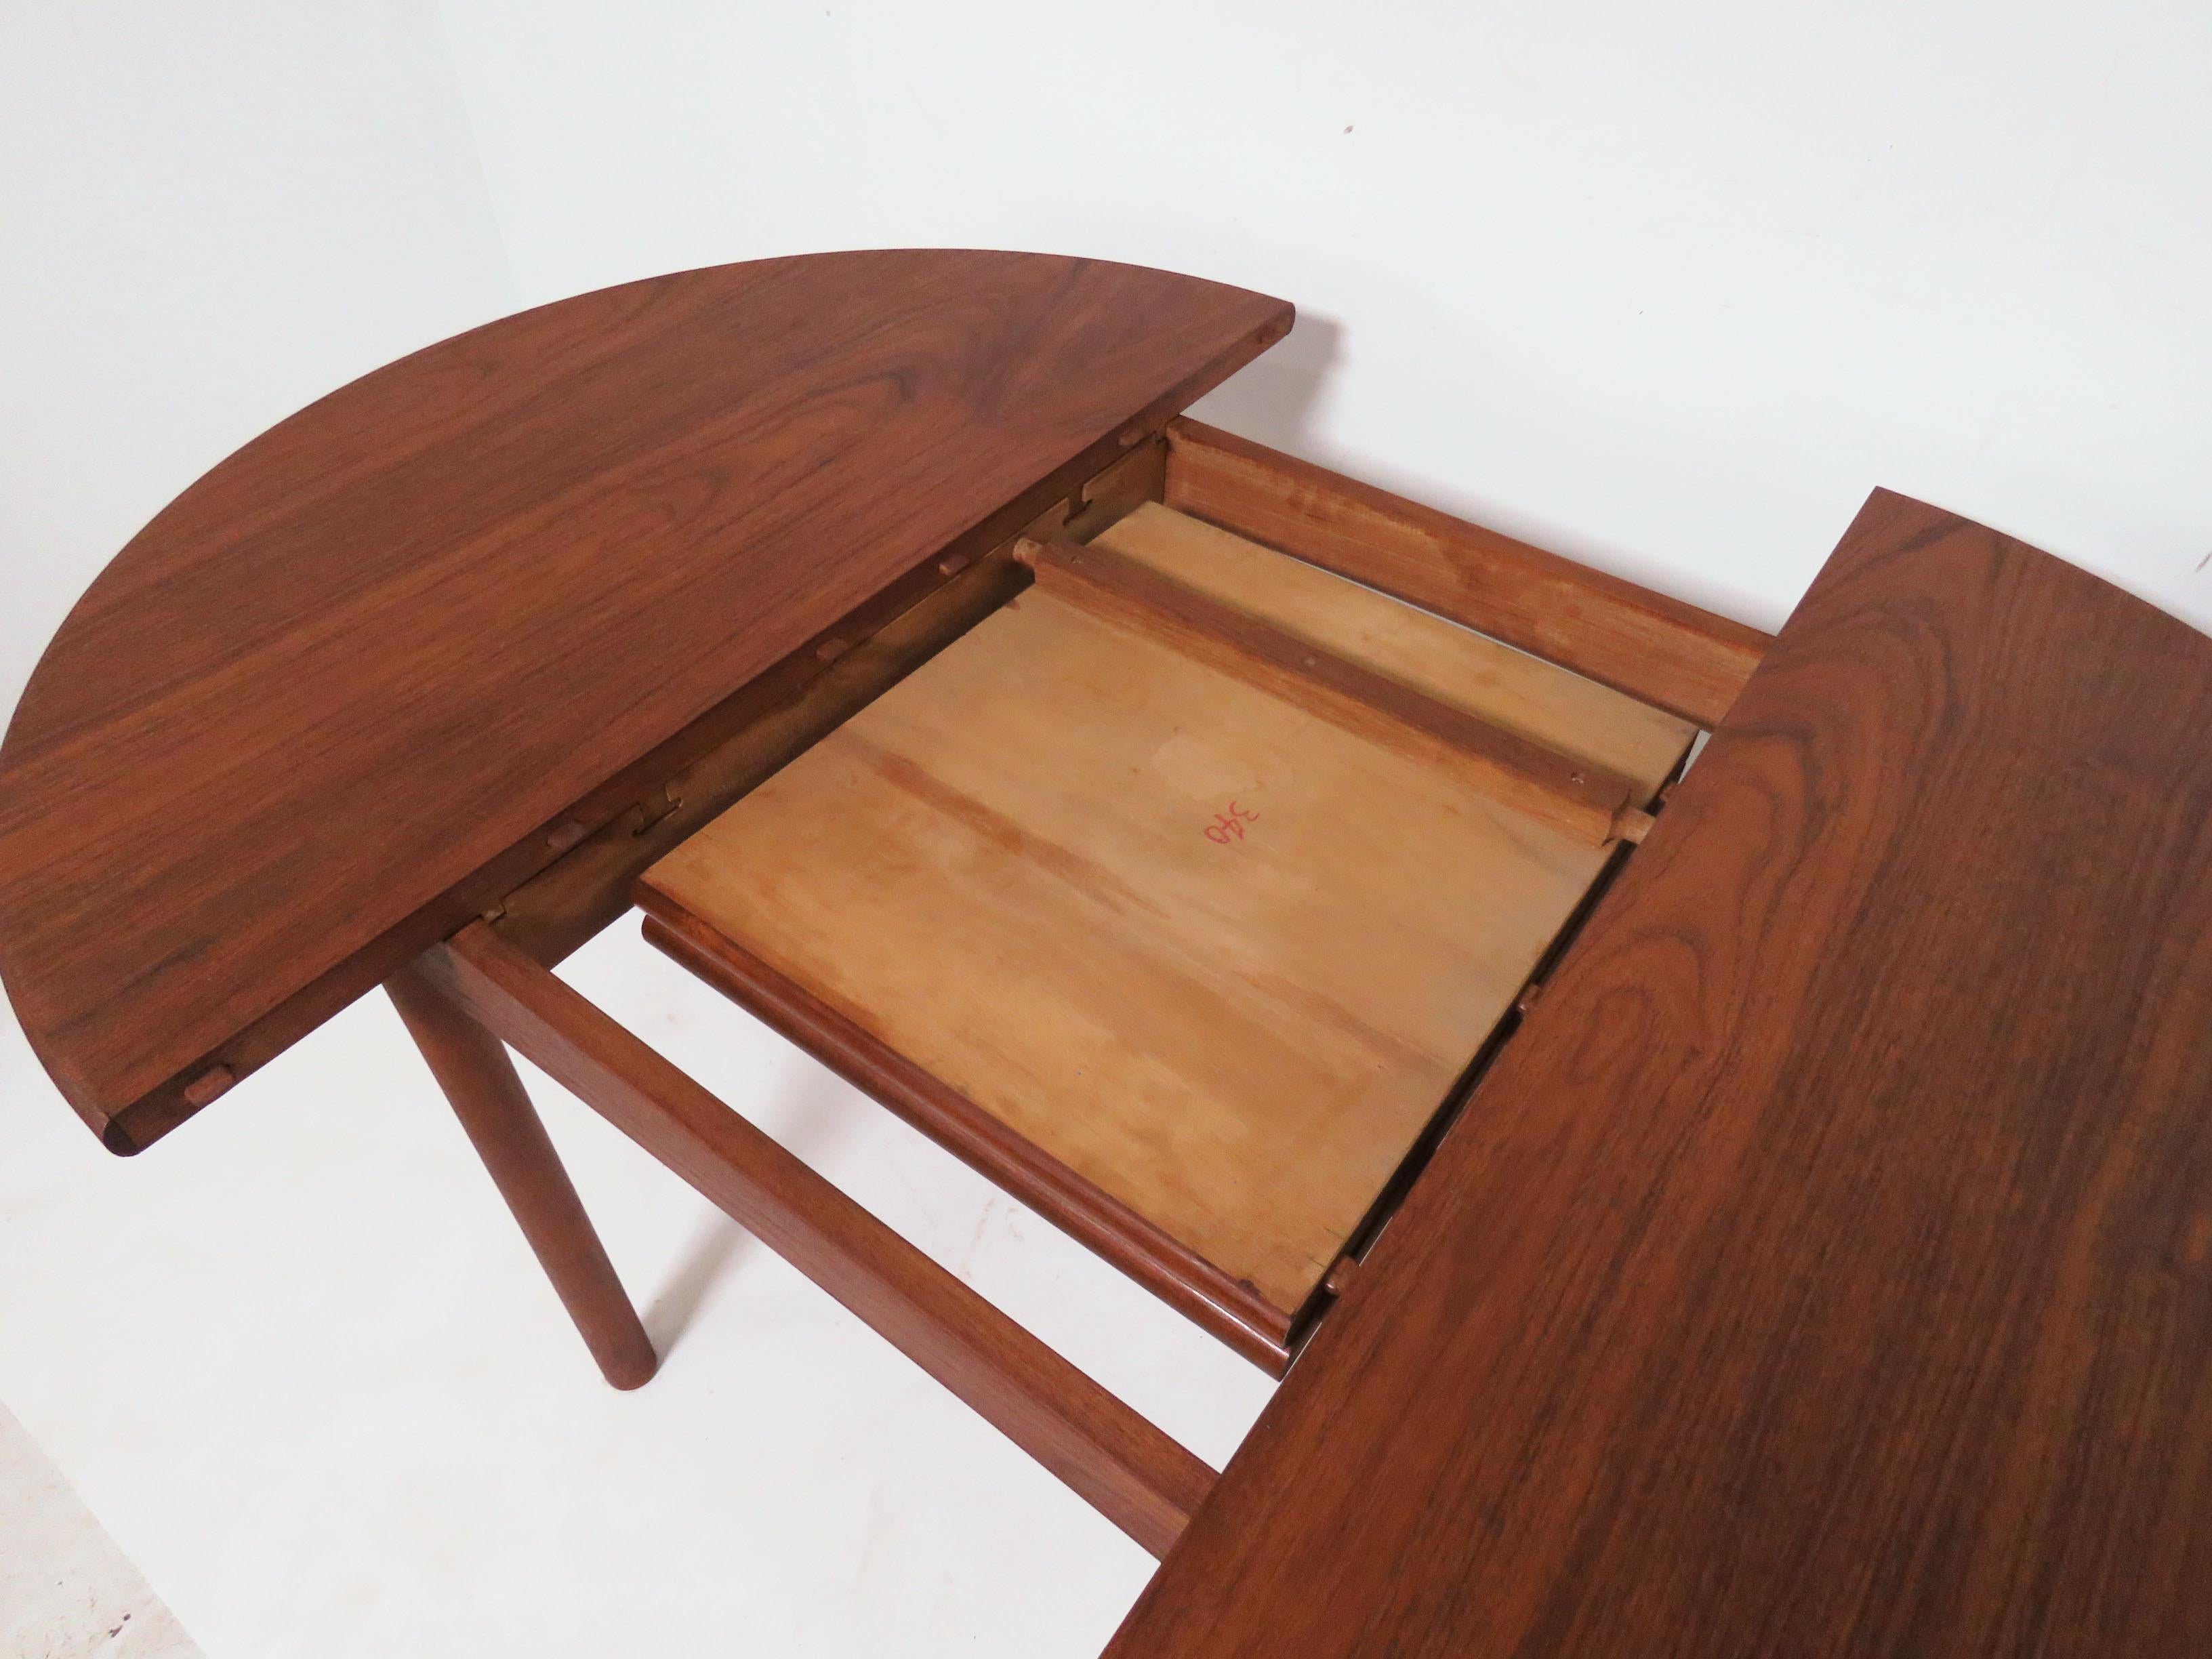 Danish dining table with hidden butterfly leaf, by Ib Kofod-Larsen for Christensen & Larsen, circa early 1960s. He created this rare model with a top of highly figured padouk wood (which exhibits a grain pattern akin to rosewood with the color of